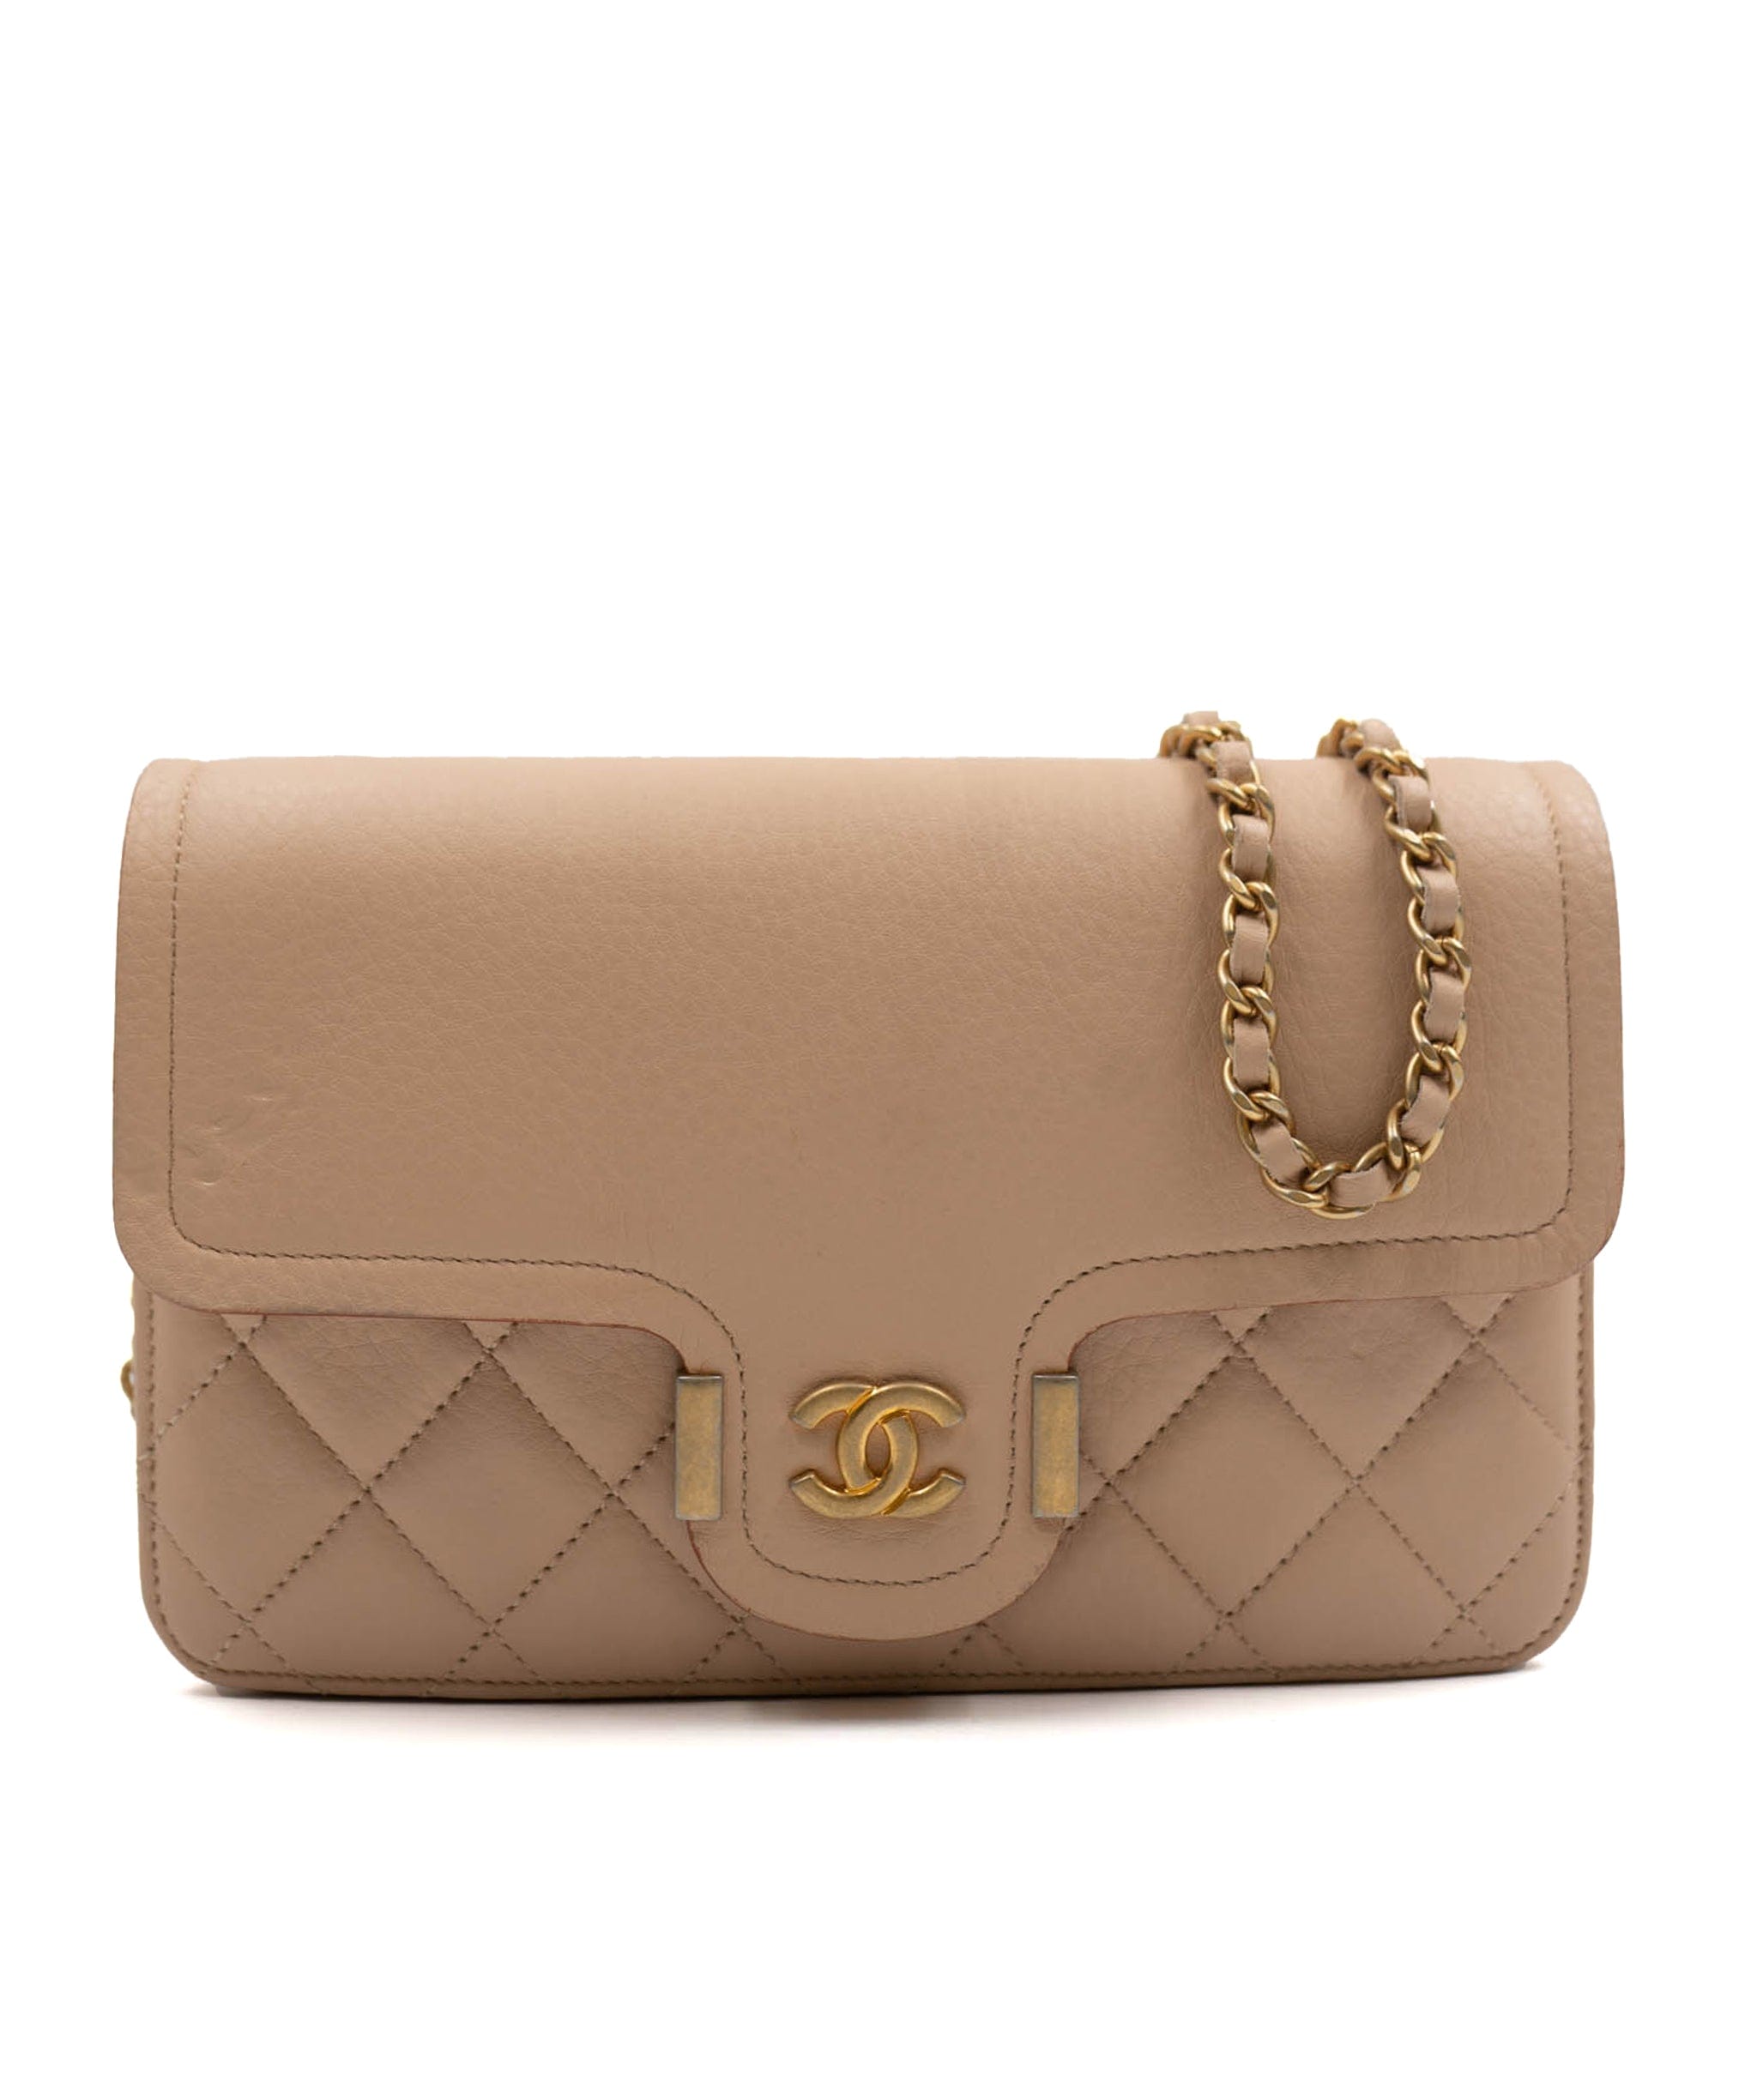 Chanel WOC, Beige GHW-- Daily Carry  Chanel mini bag, Chanel woc beige, Chanel  woc